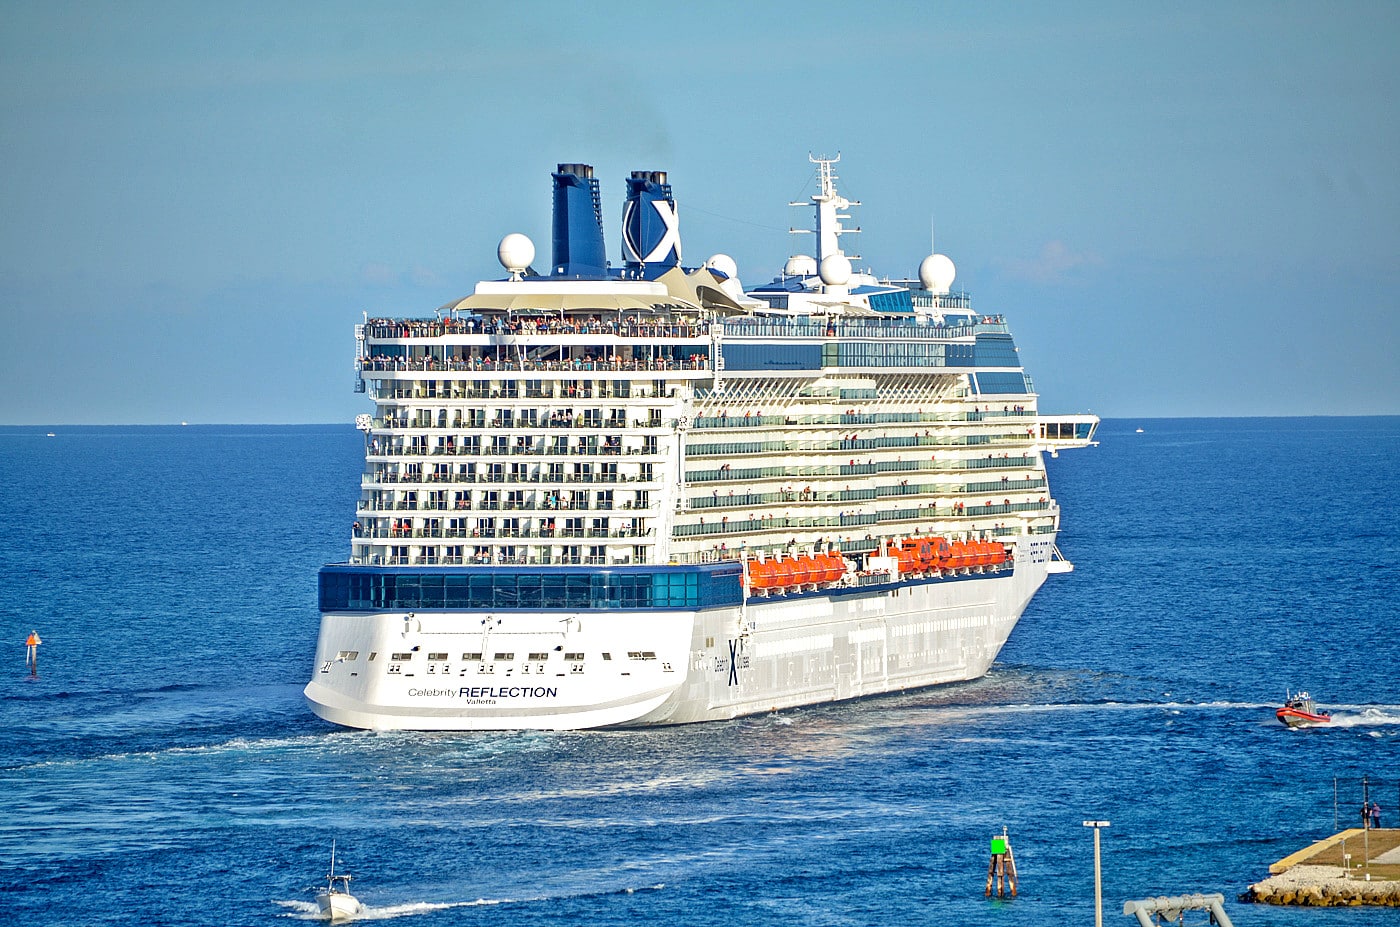 celebrity reflection out of port everglades